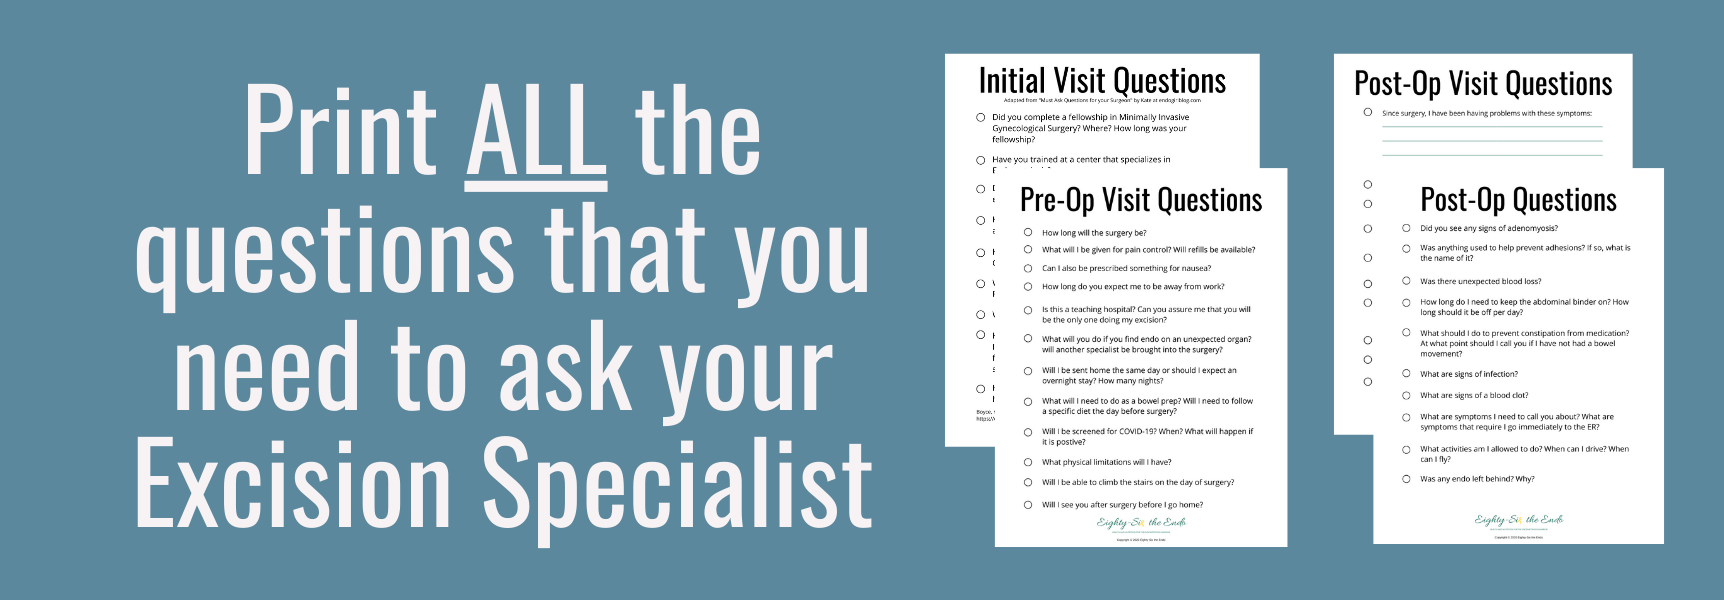 Print all the questions that you need to ask your excision specialist